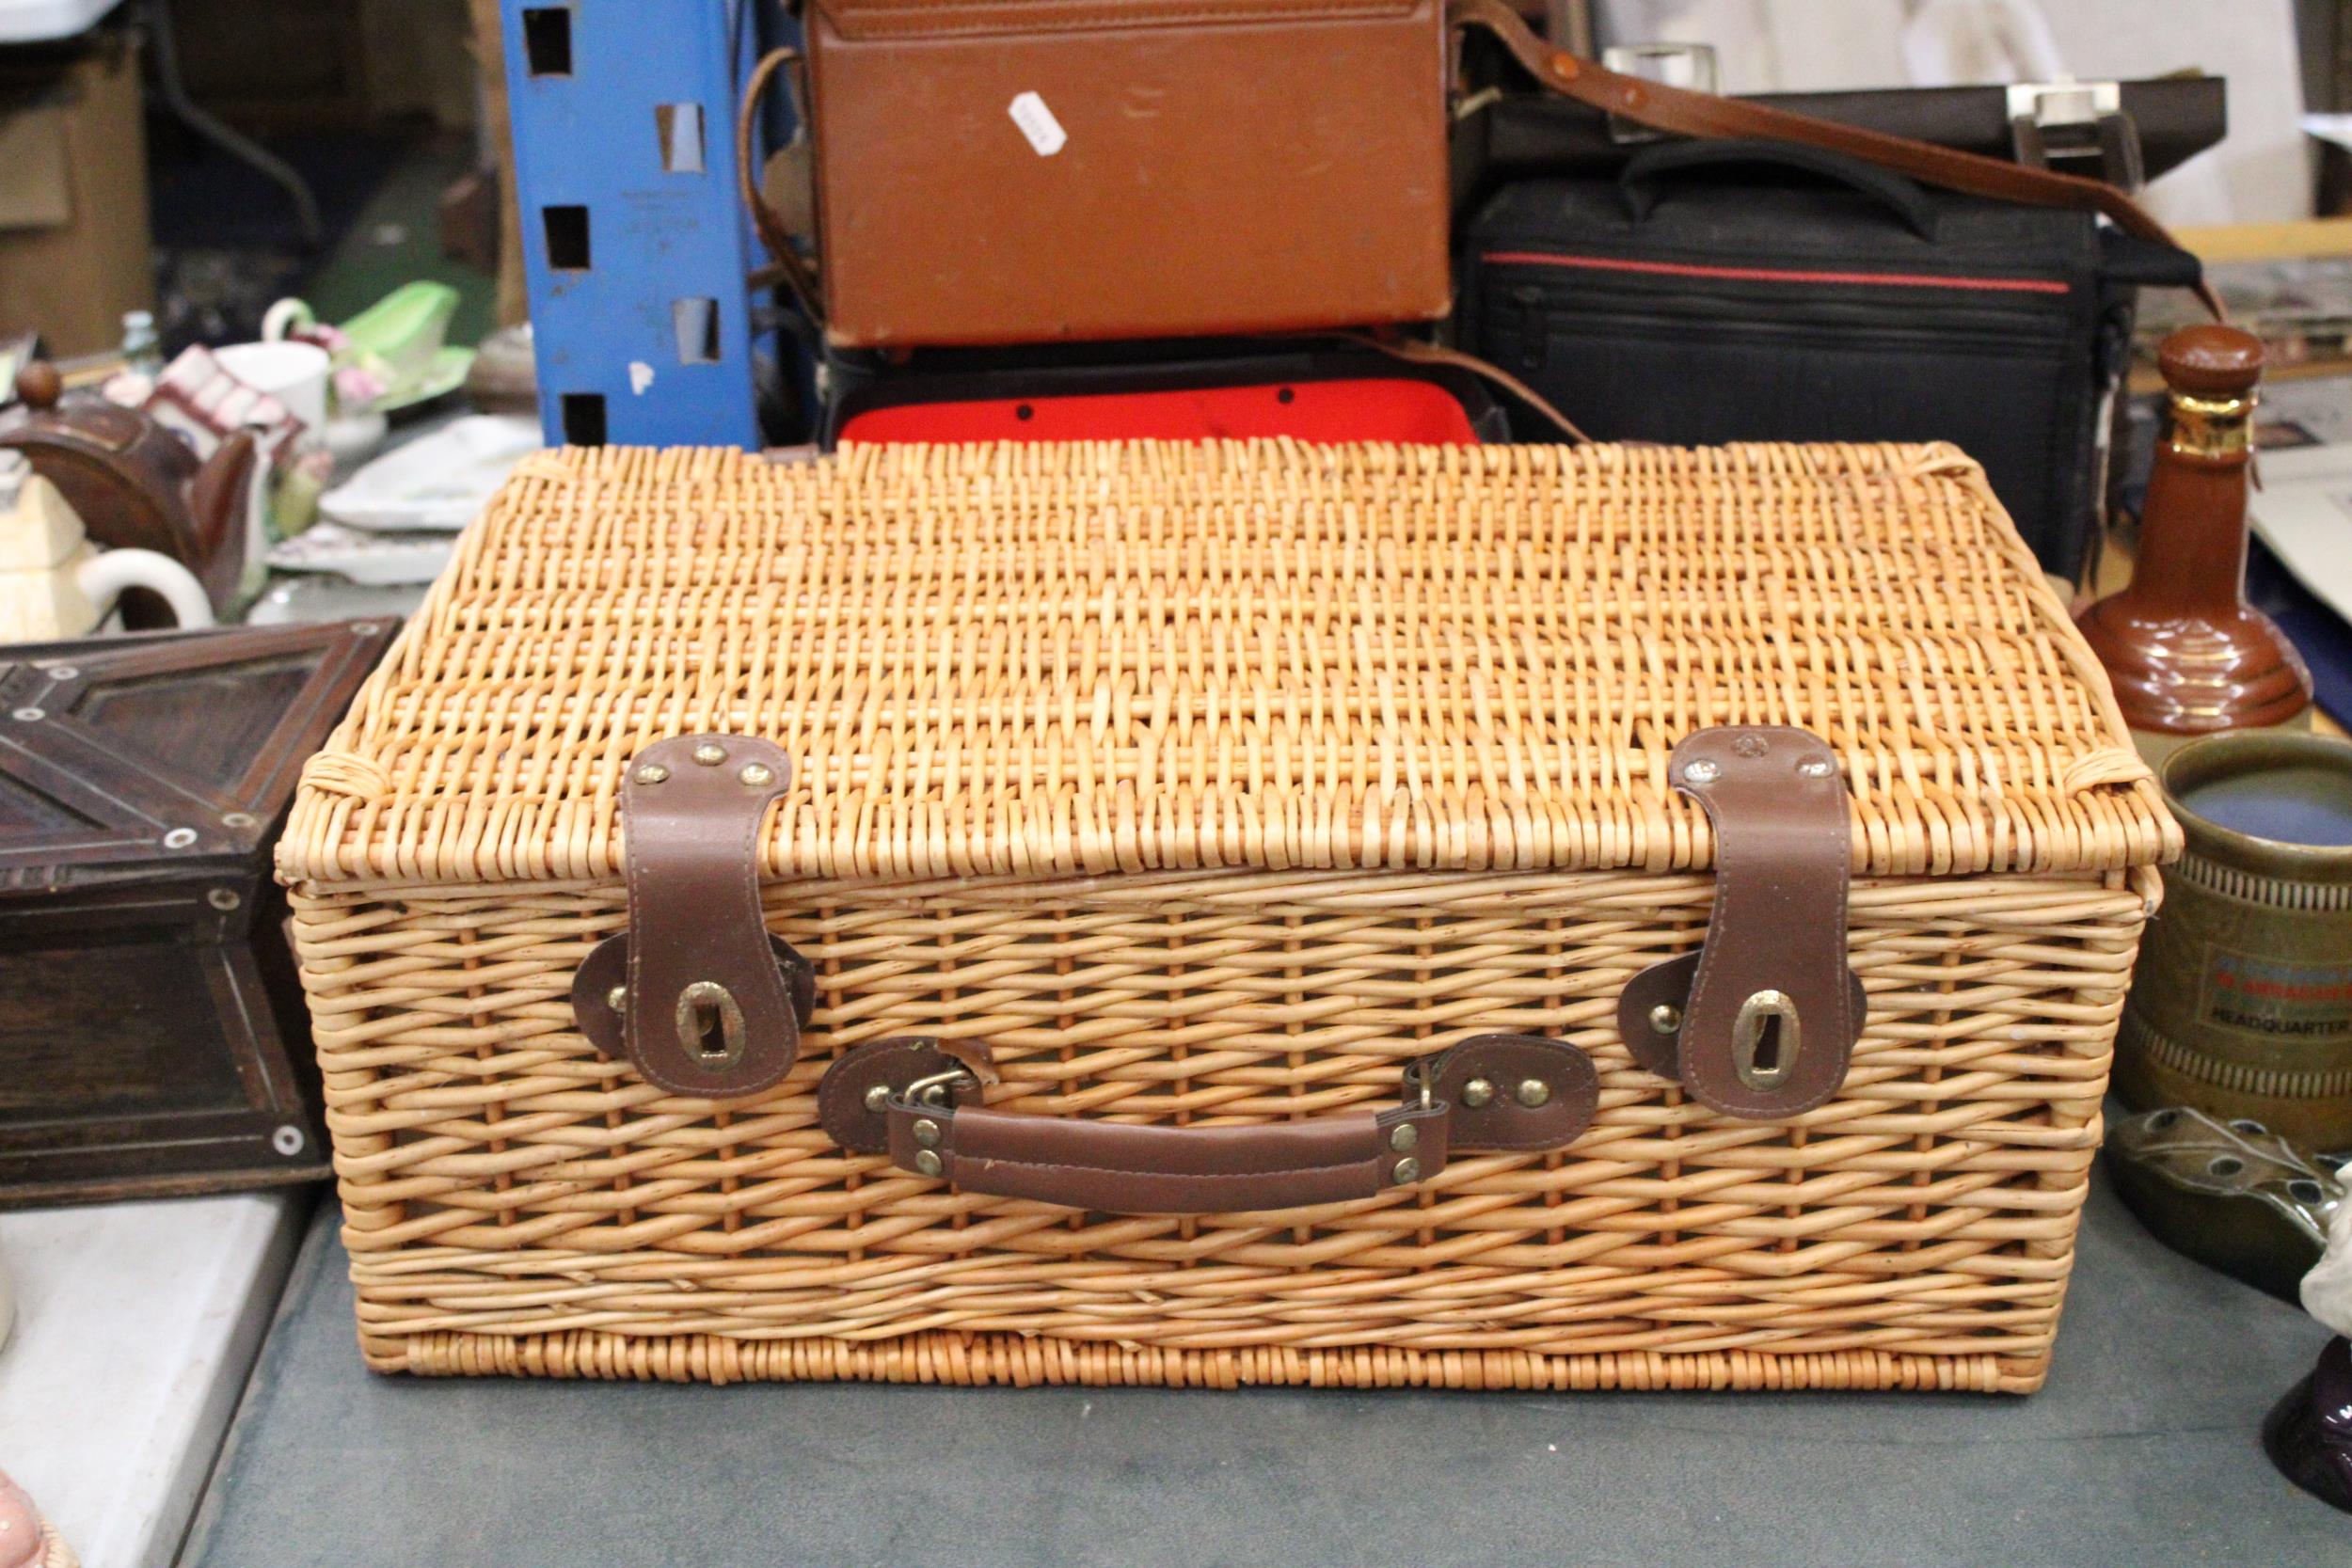 A LARGE WICKER PICNIC HAMPER CONTAINING CERAMIC CUPS AND PLATES, PLUS CUTLERY, A BOTTLE OPENER AND - Image 5 of 5